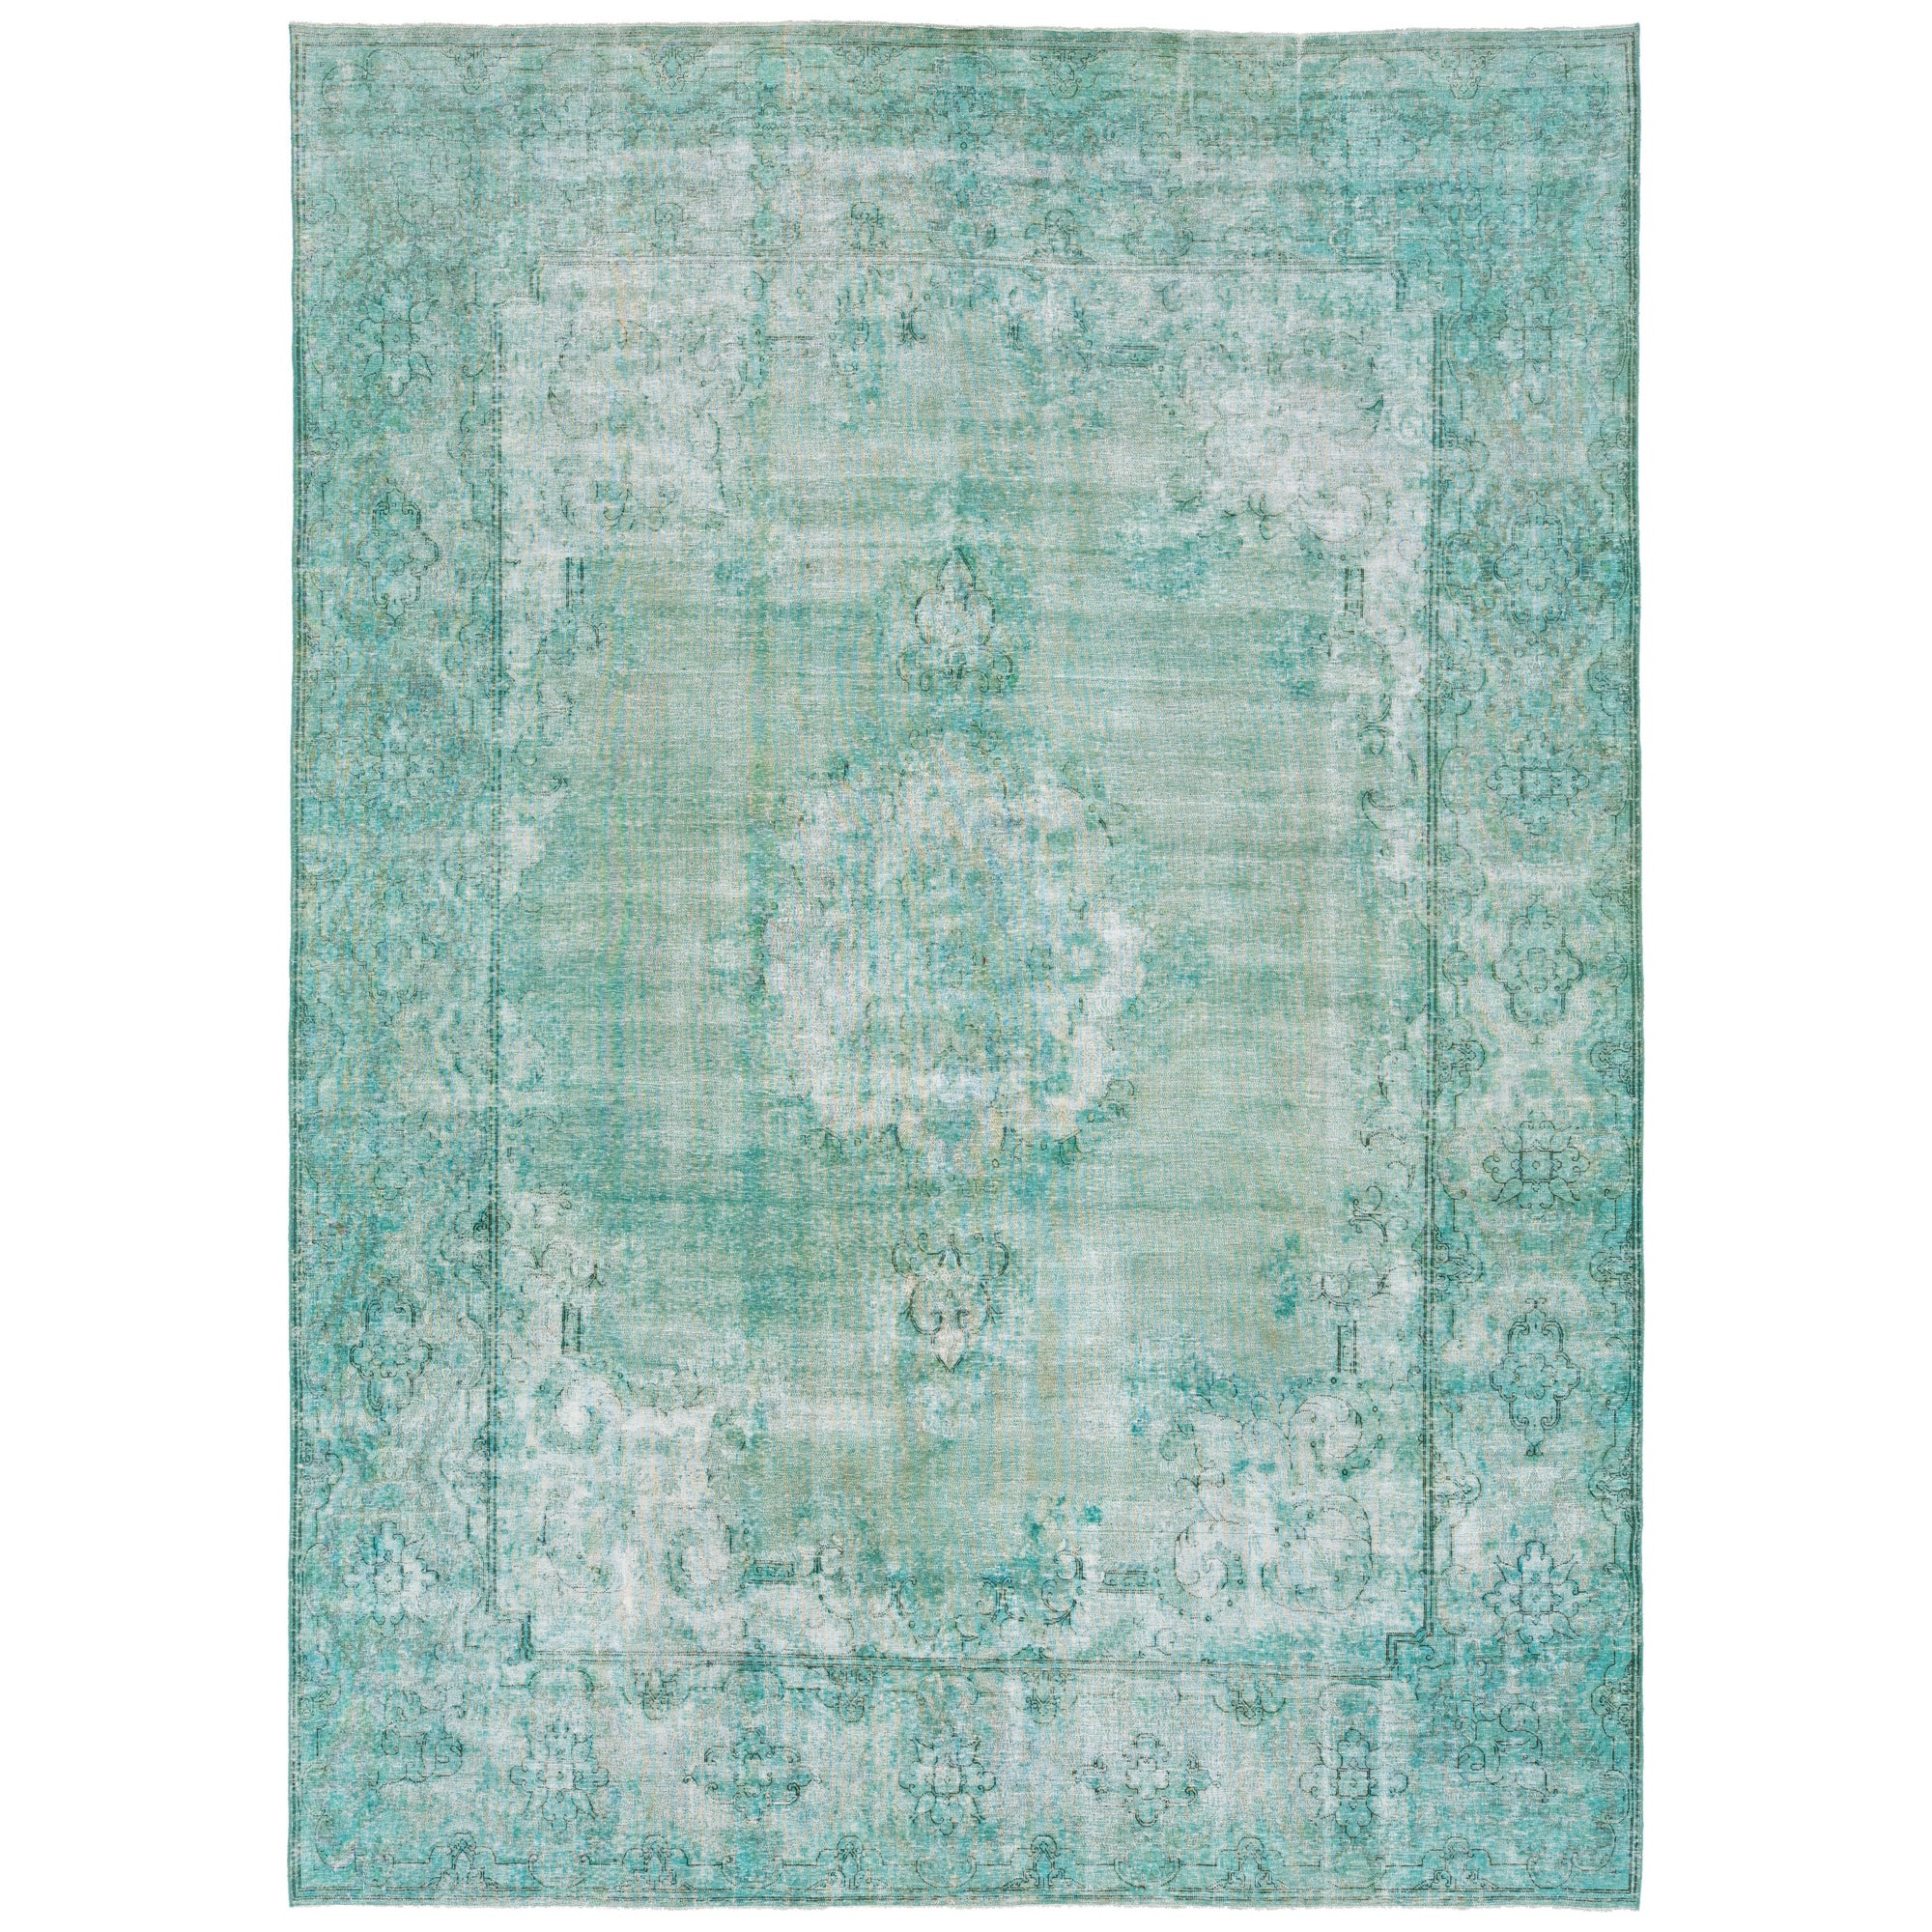   Antique Overdyed Wool Rug With Allover Motif In Light Green